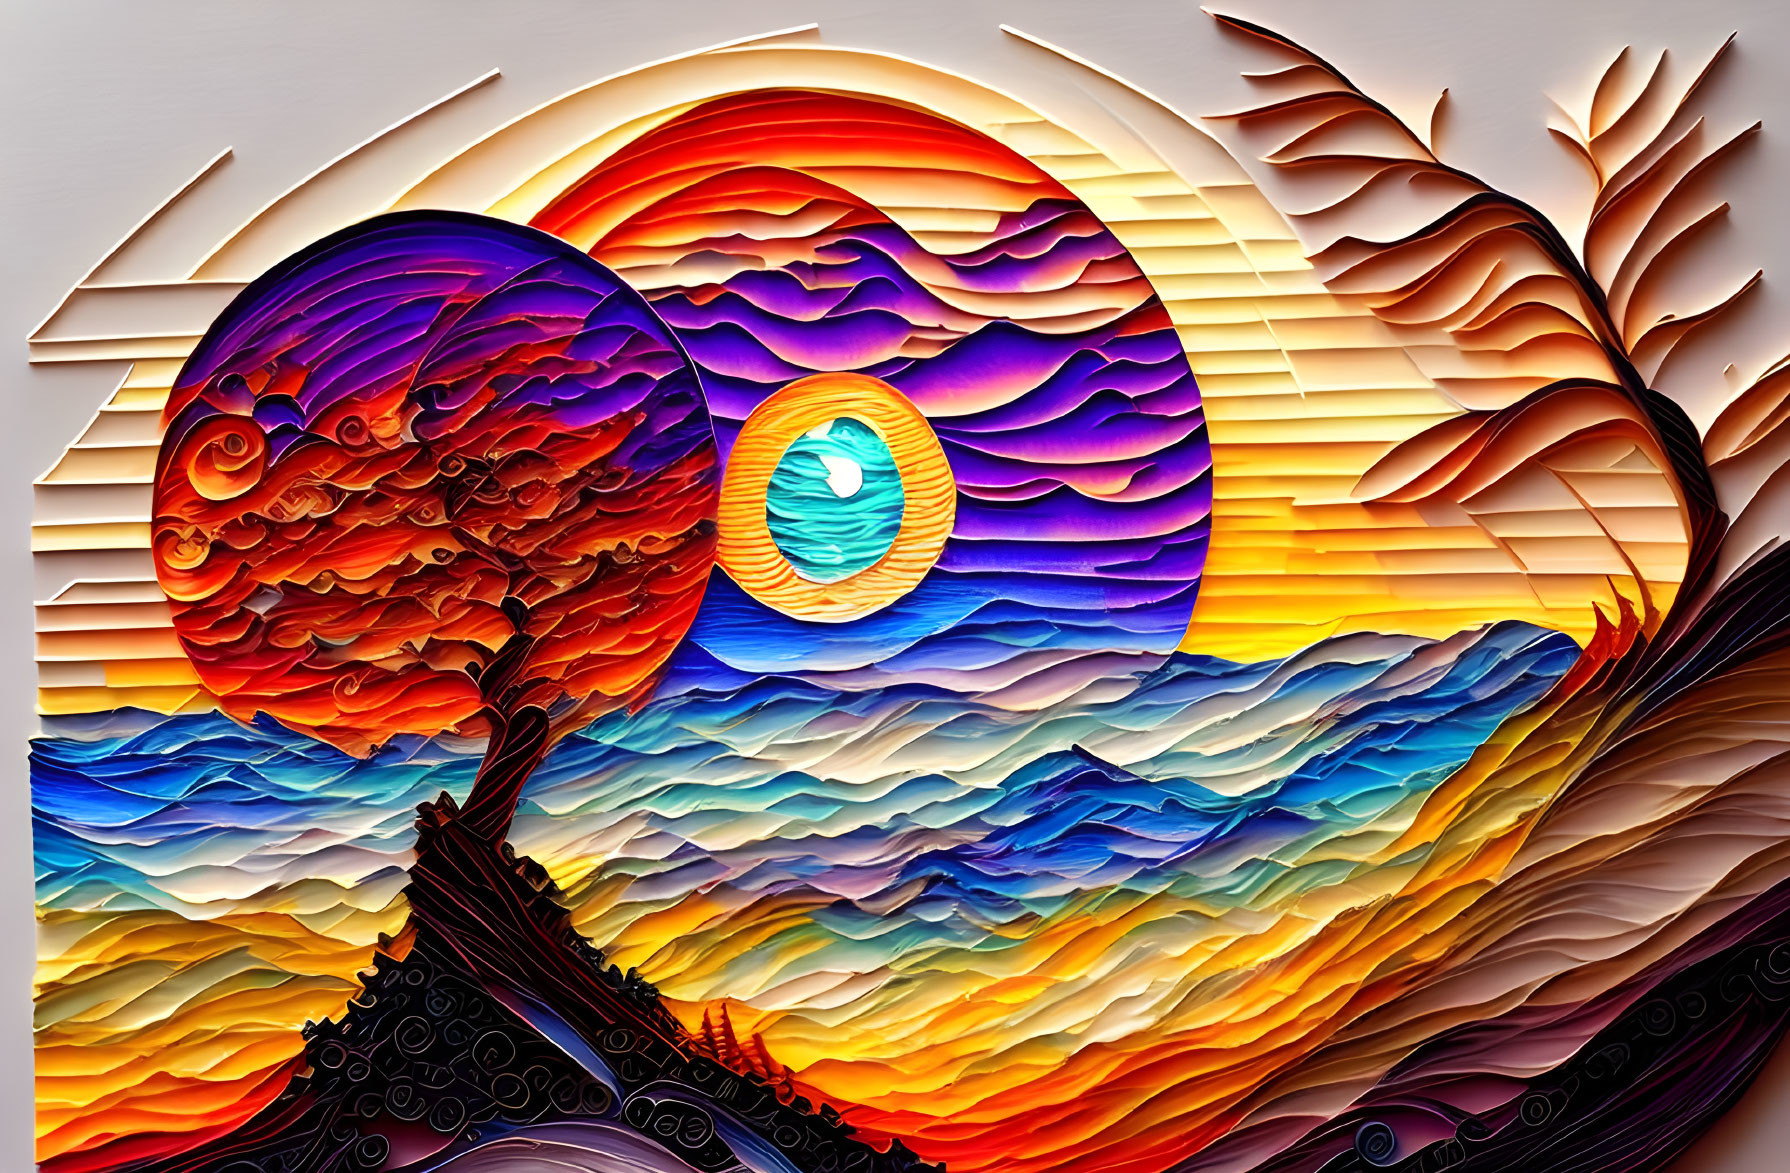 Colorful 3D paper art of landscape with tree, sun, and waves